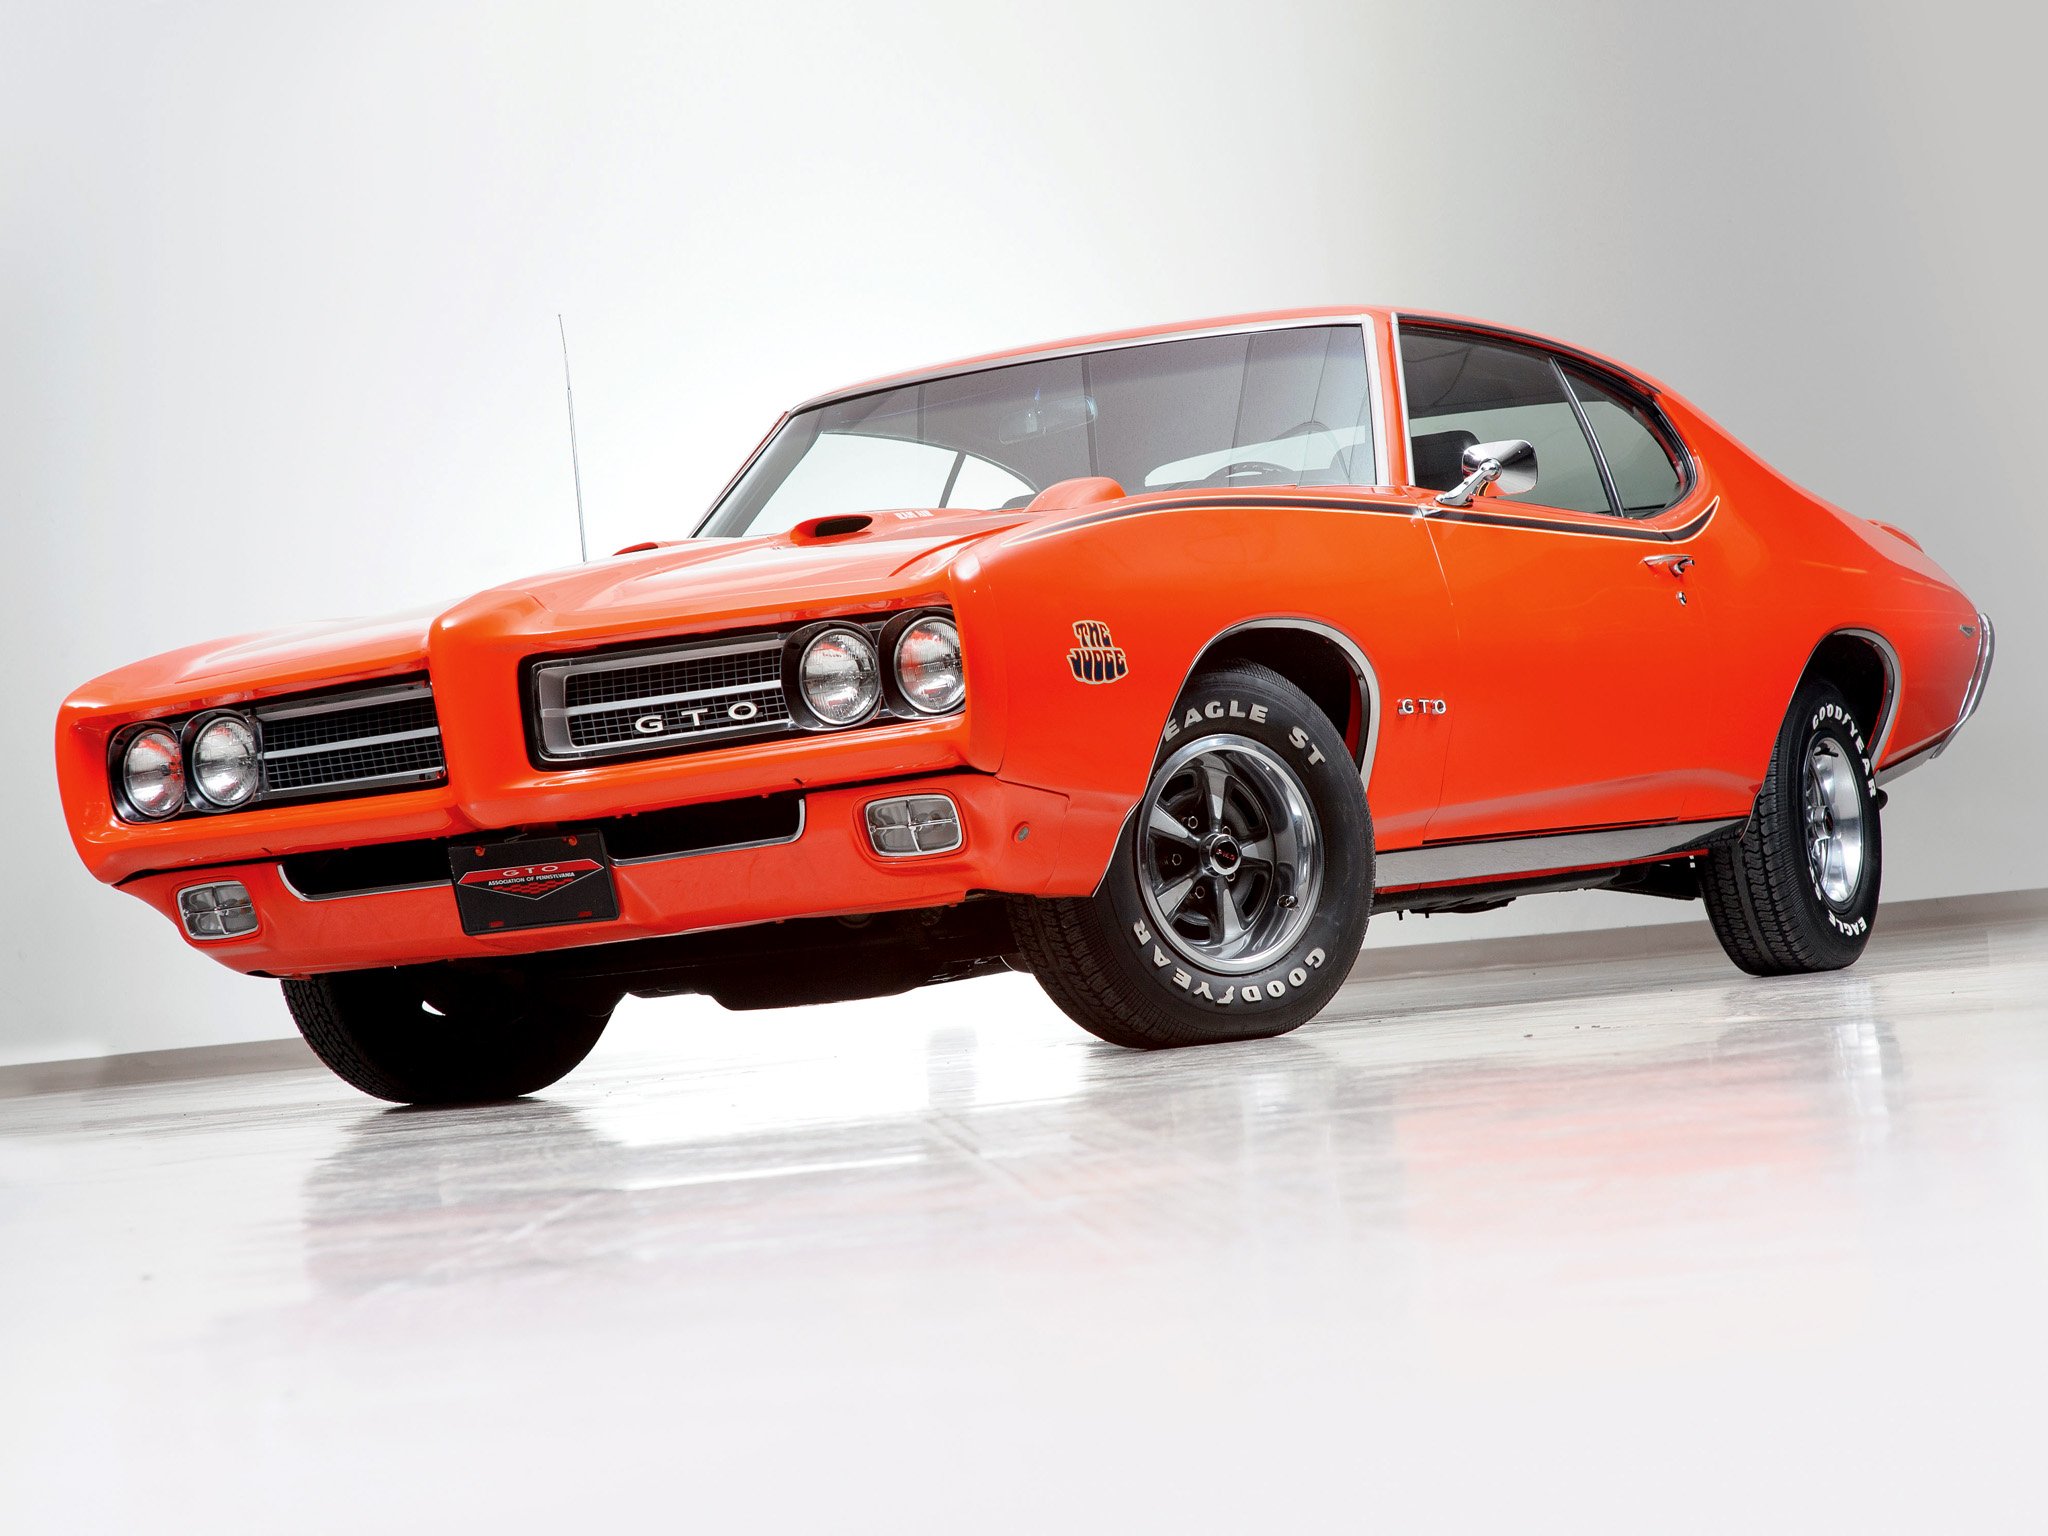 1969 Pontiac Gto Judge Hardtop Coupe Muscle Classic Wallpapers Hd Desktop And Mobile